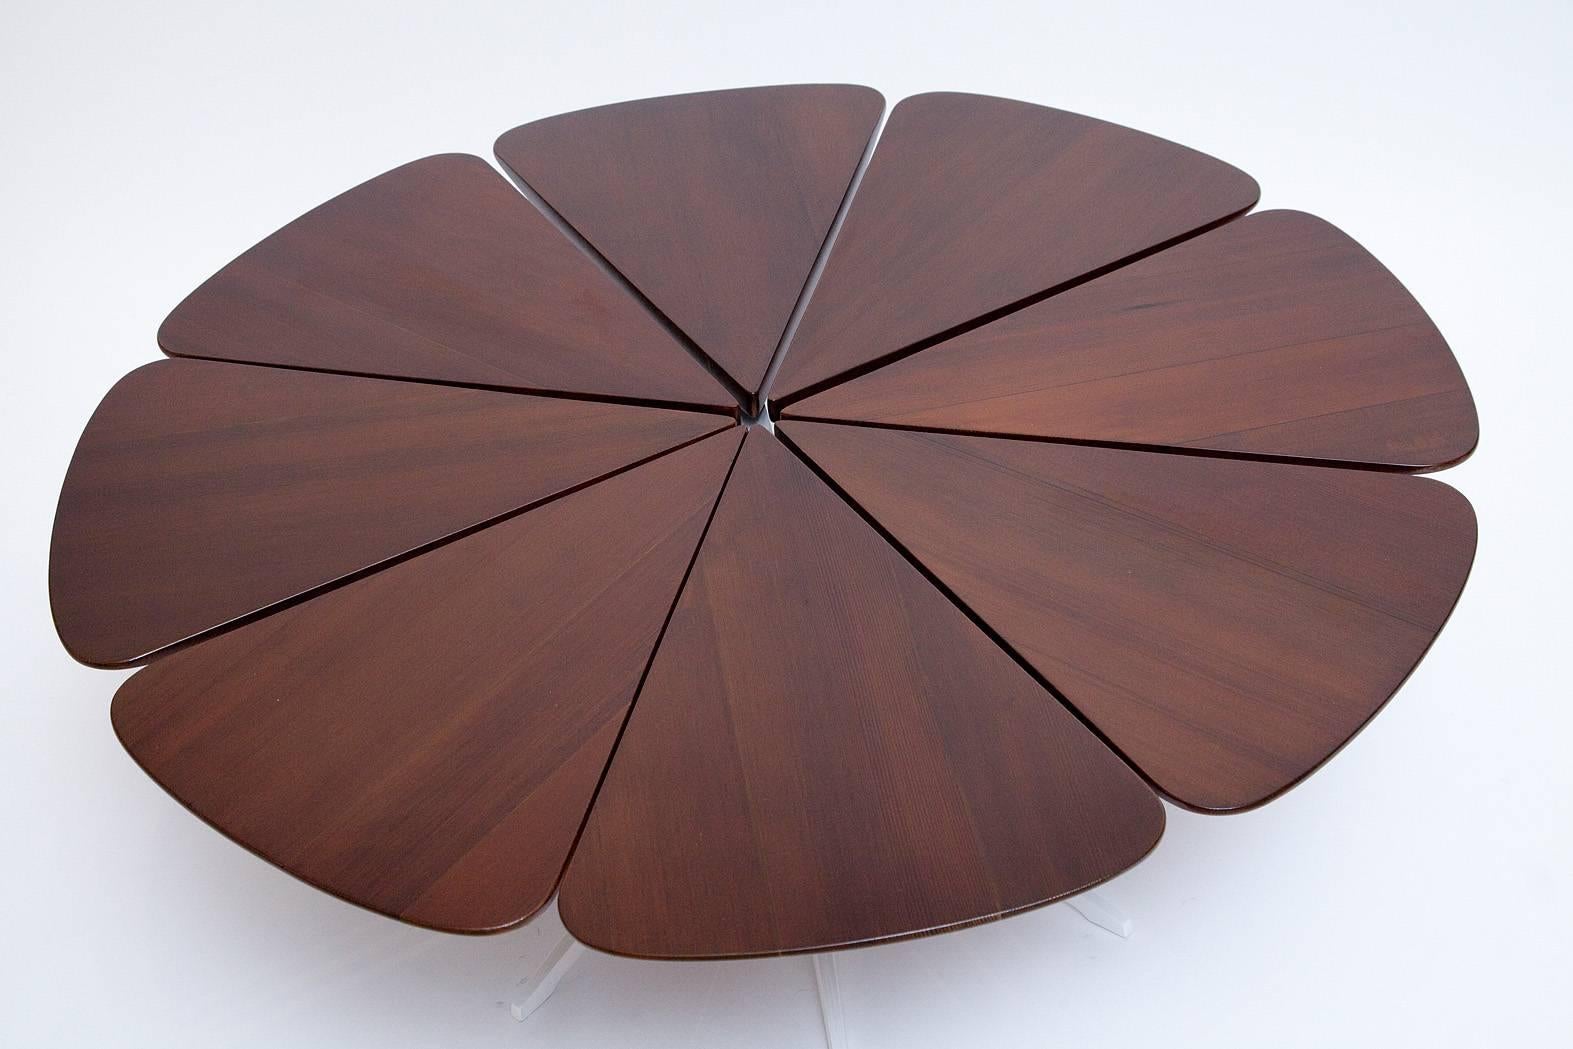 Fully restored petal coffee table by Richard Schultz for Knoll. Finished redwood with white enameled aluminium base. Retains original 1960s era Knoll paper label.